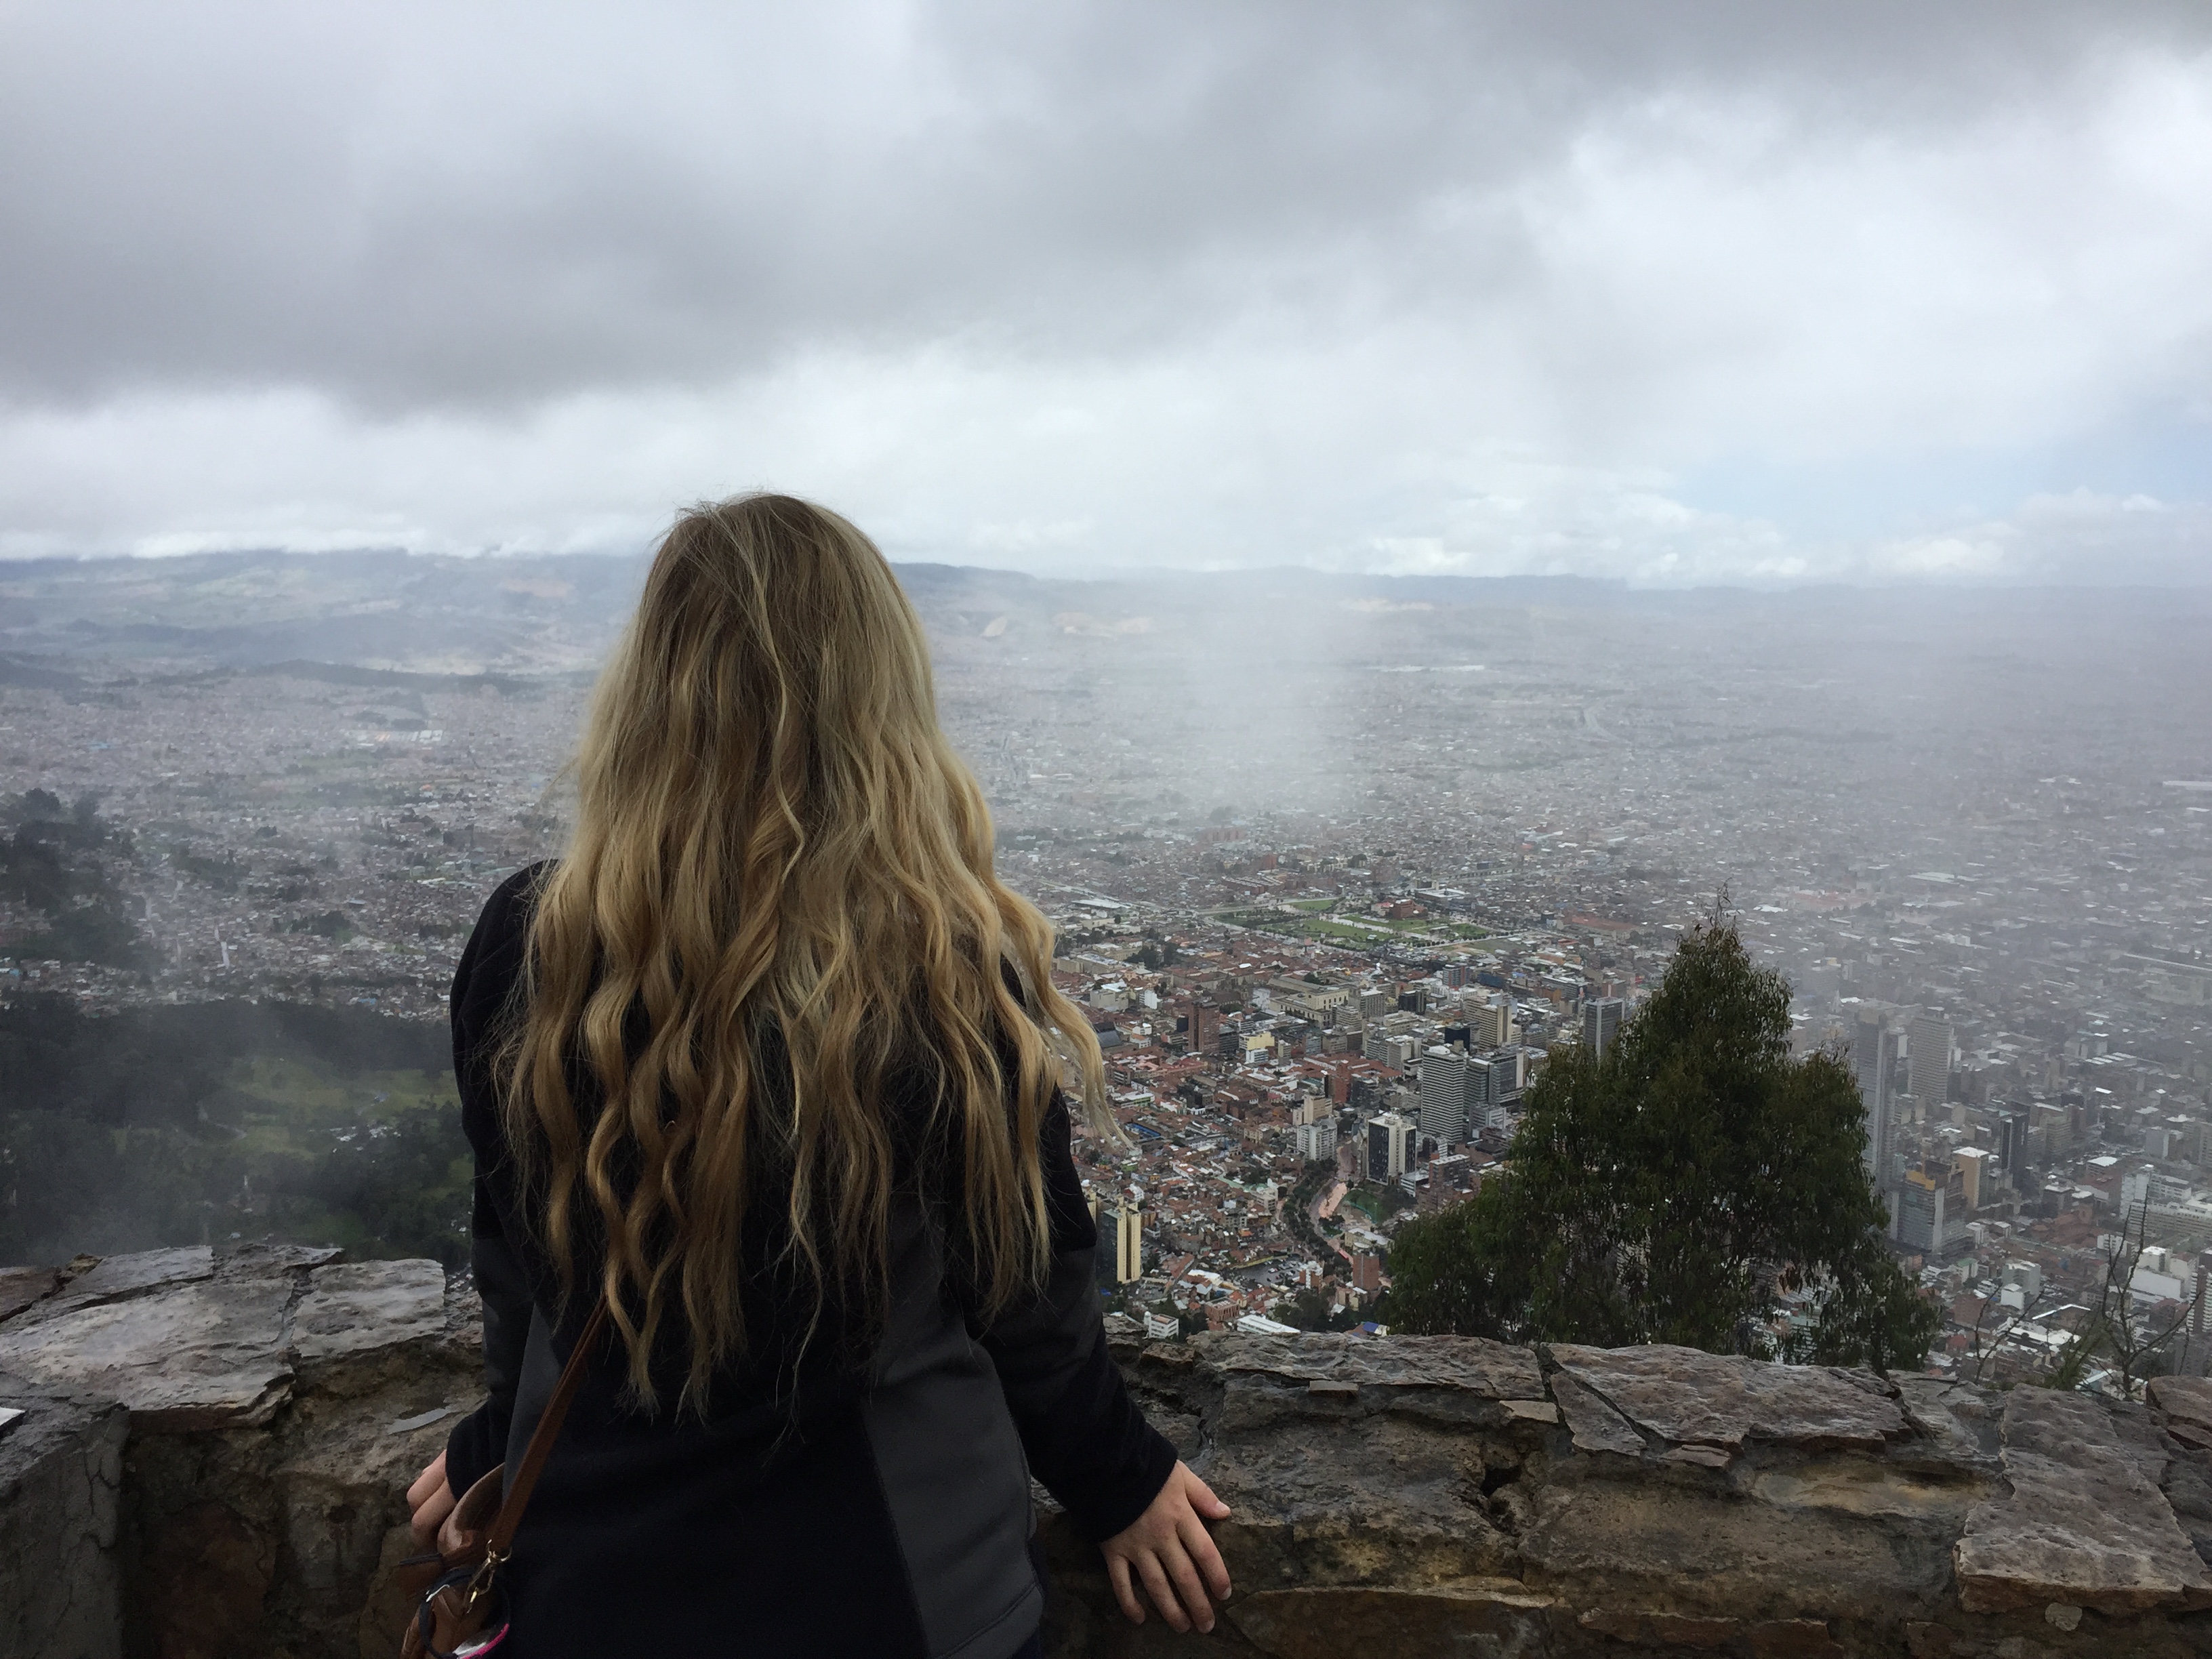 Abby Cain overlooking city of Bogotoa Colombia